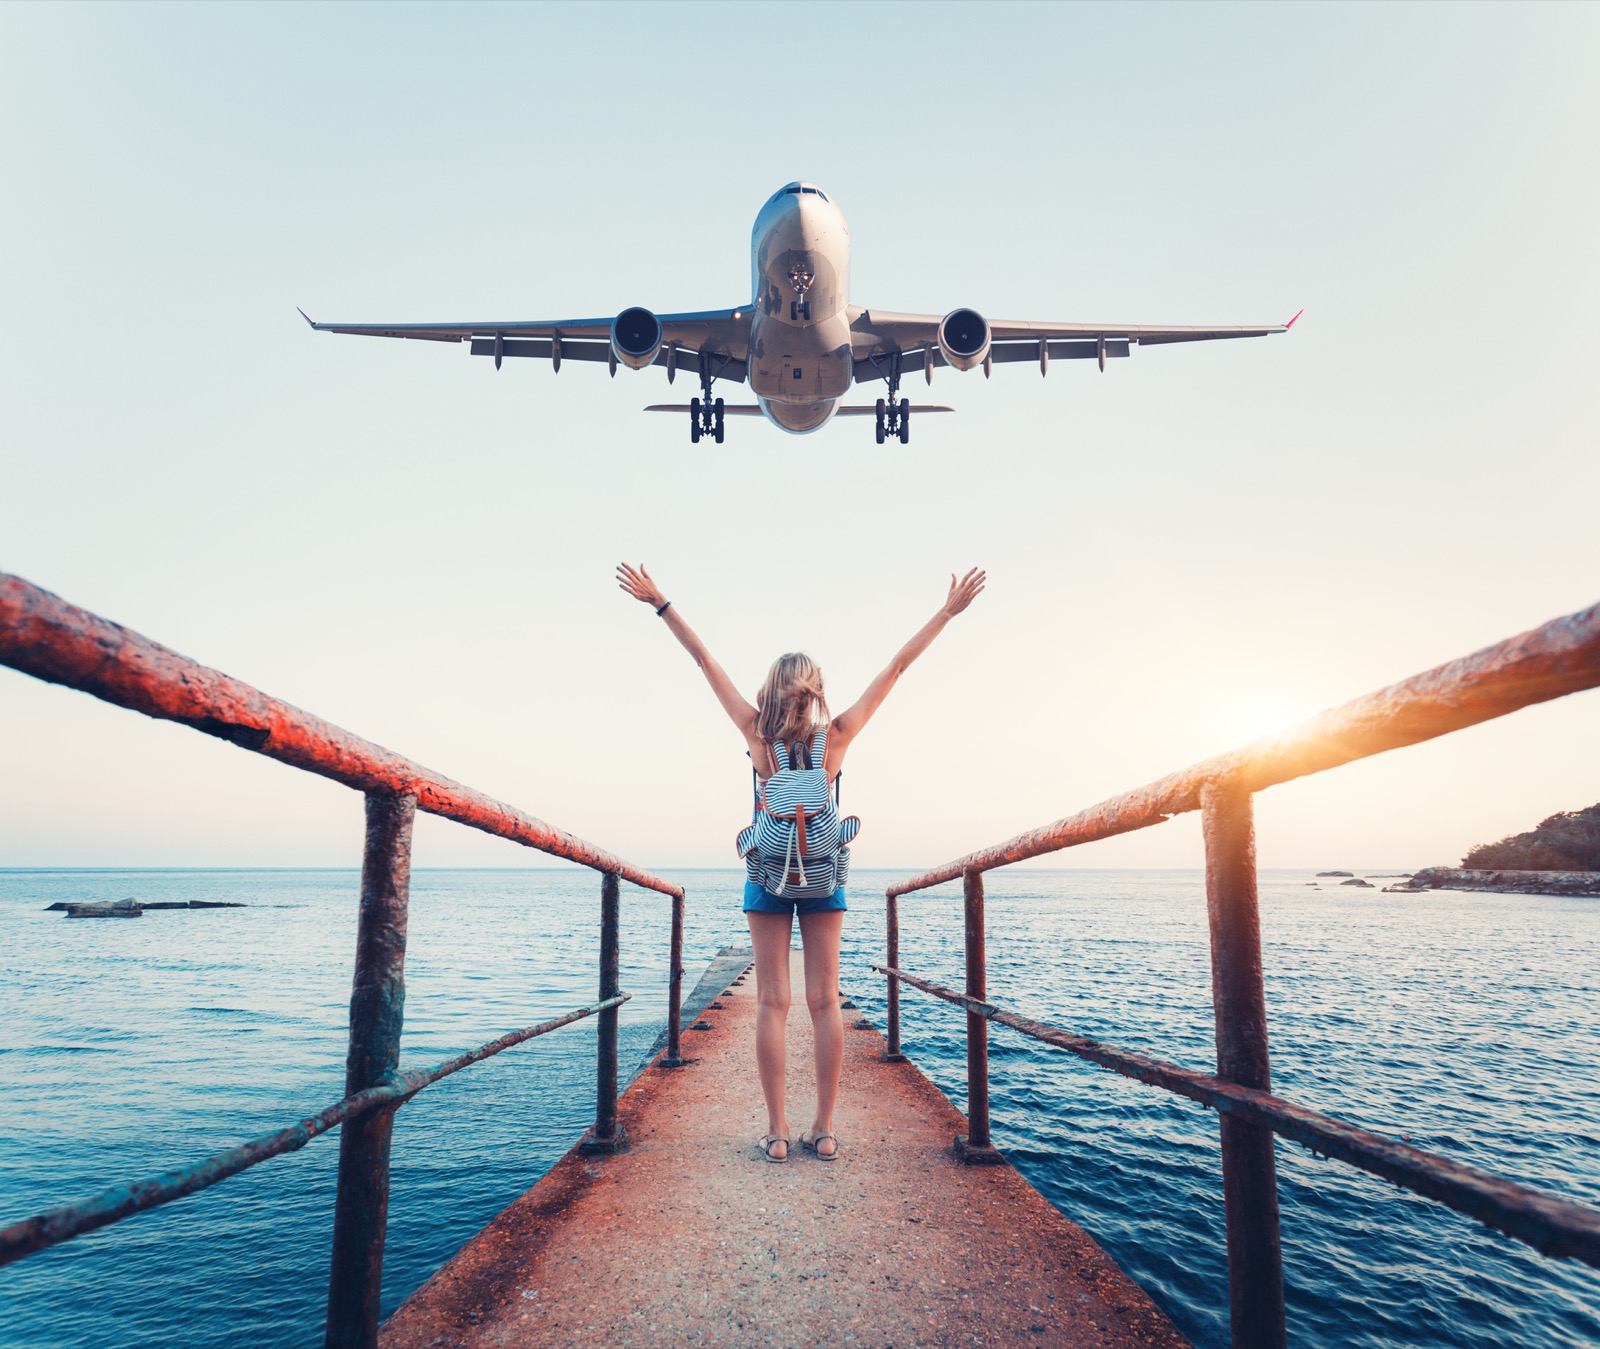 If You Score 14/15 on This Riddle Quiz, You’re Smarter Than the Average Person Airplane And Woman At Sunset. Summer Landscape With Girl Standing On The Sea Pier With Raised Up Arms And Flying Passenger Airplane. Woman And Landing Commercial Plane In The Evening. Lifestyle